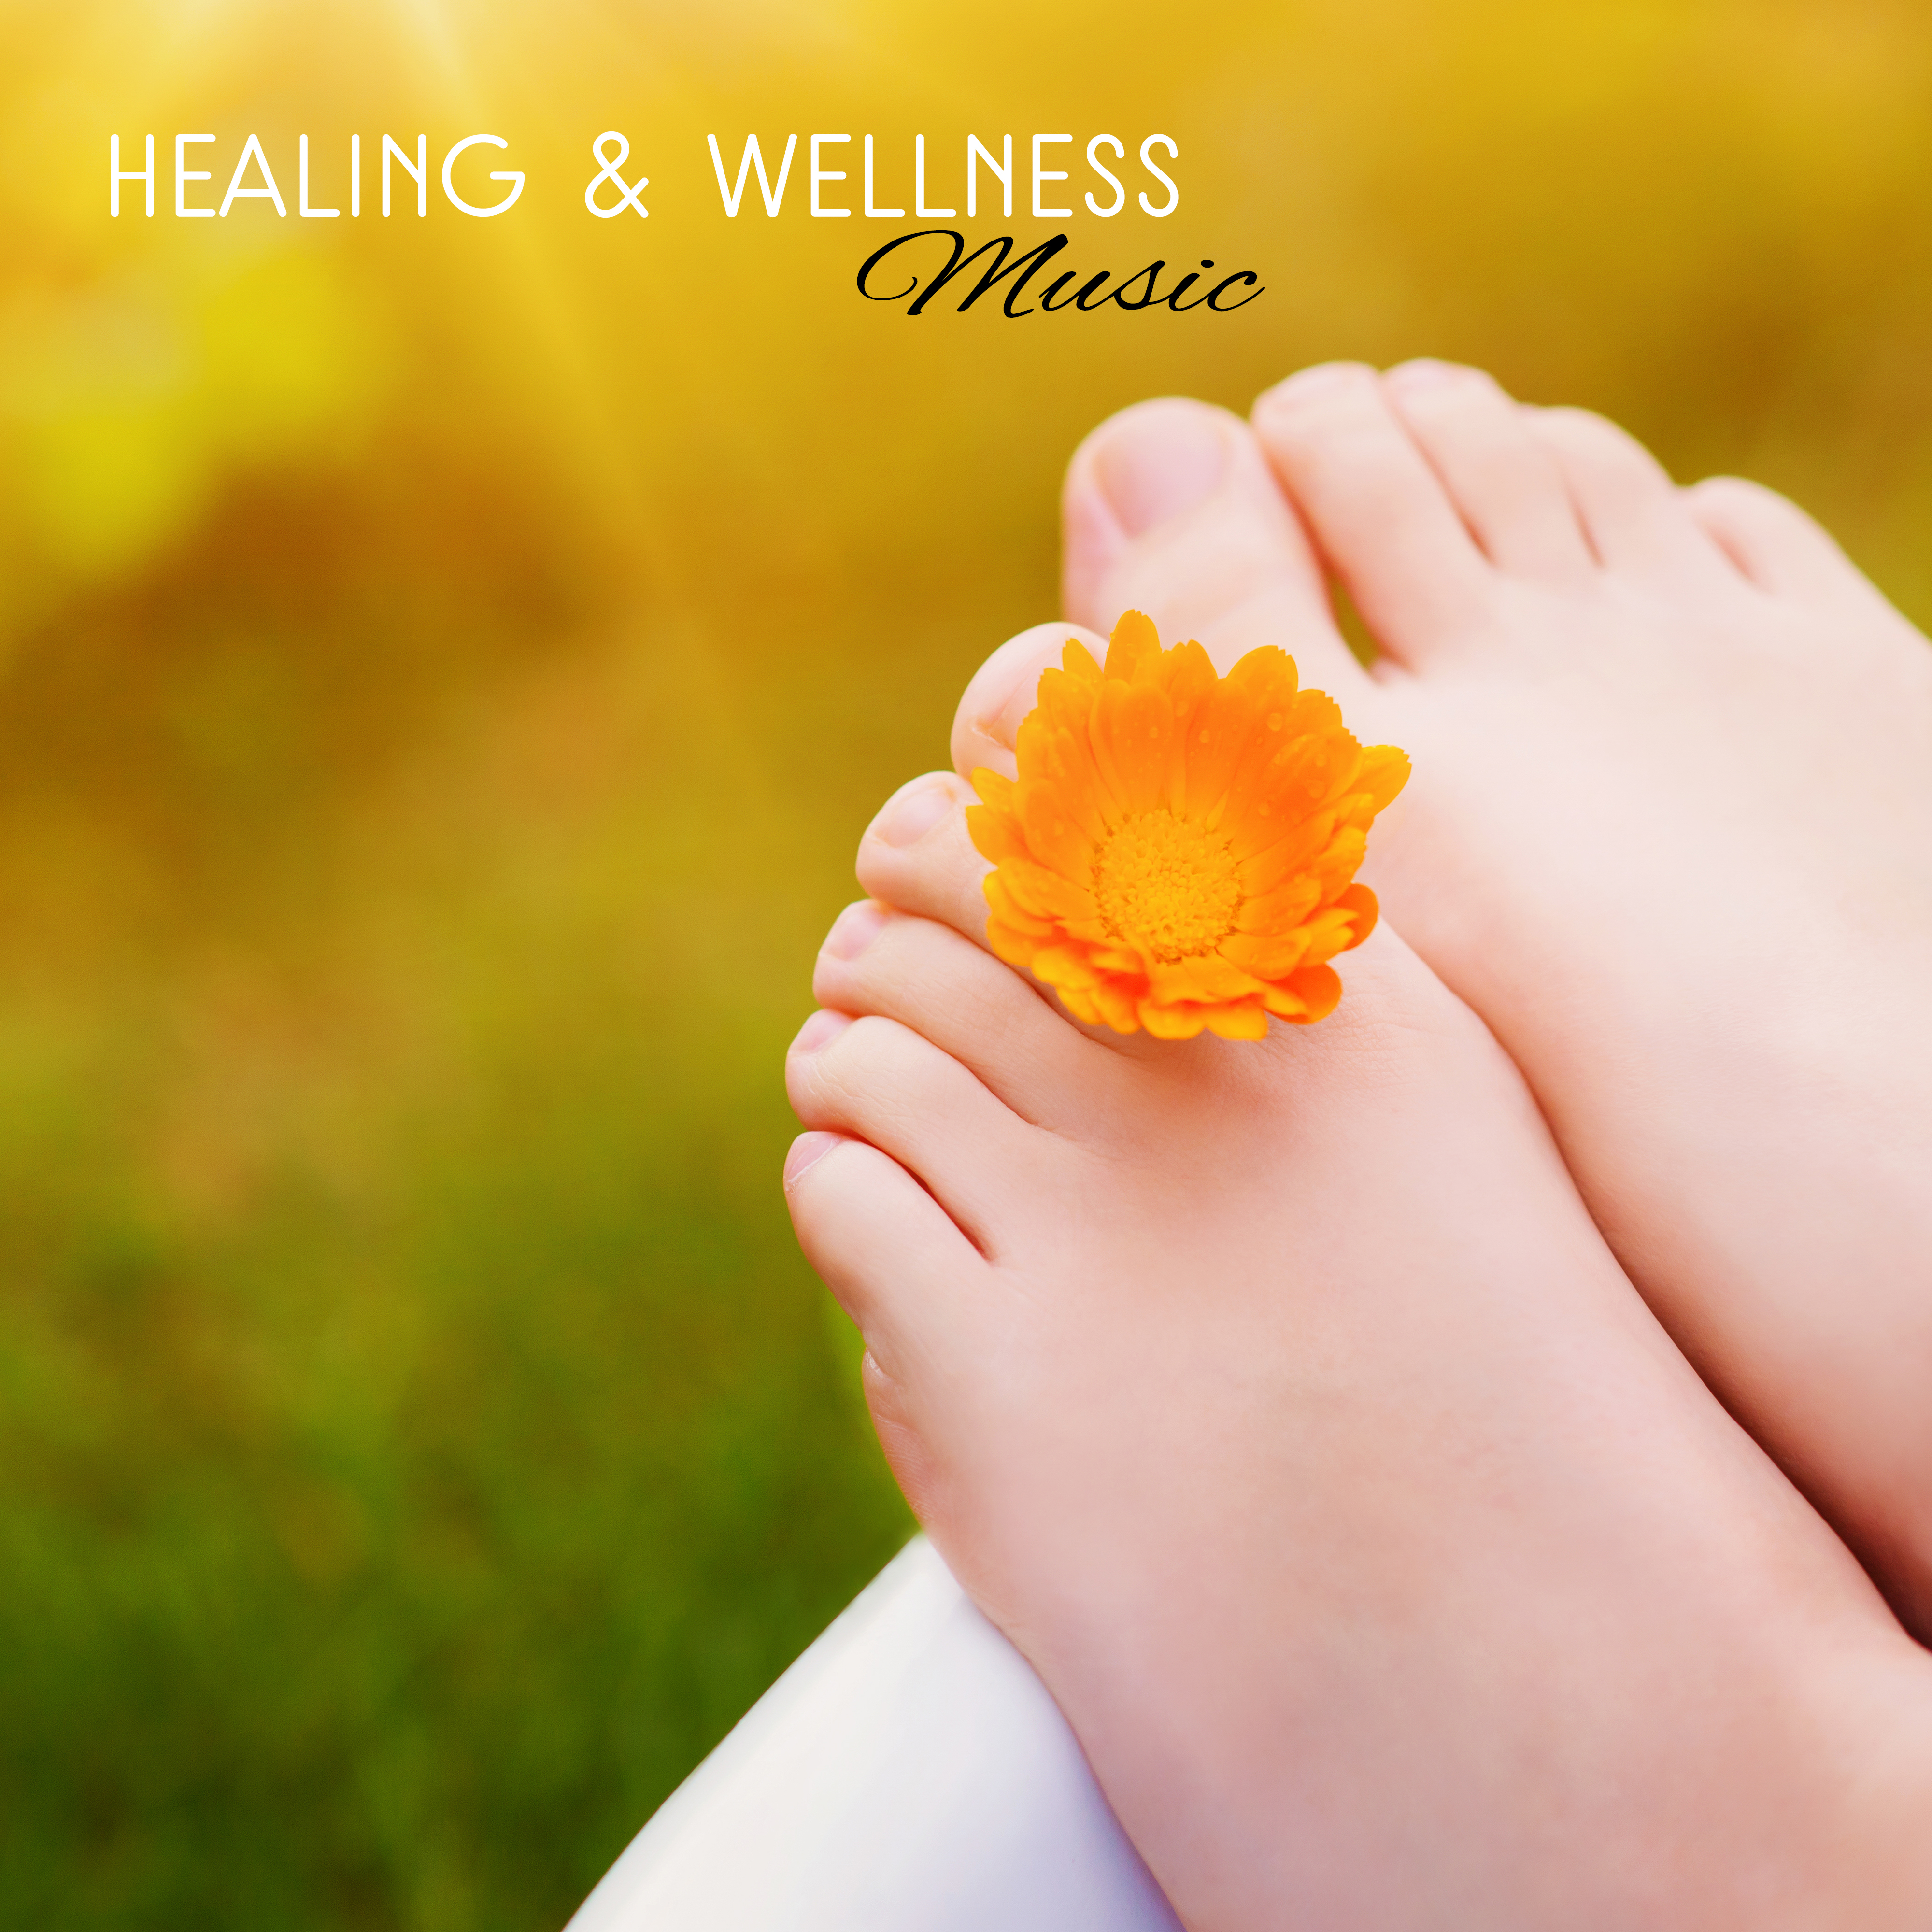 Healing  Wellness Music  Soft Songs to Relax, Massage Melodies, Chilled Sounds for Spa, New Age Music